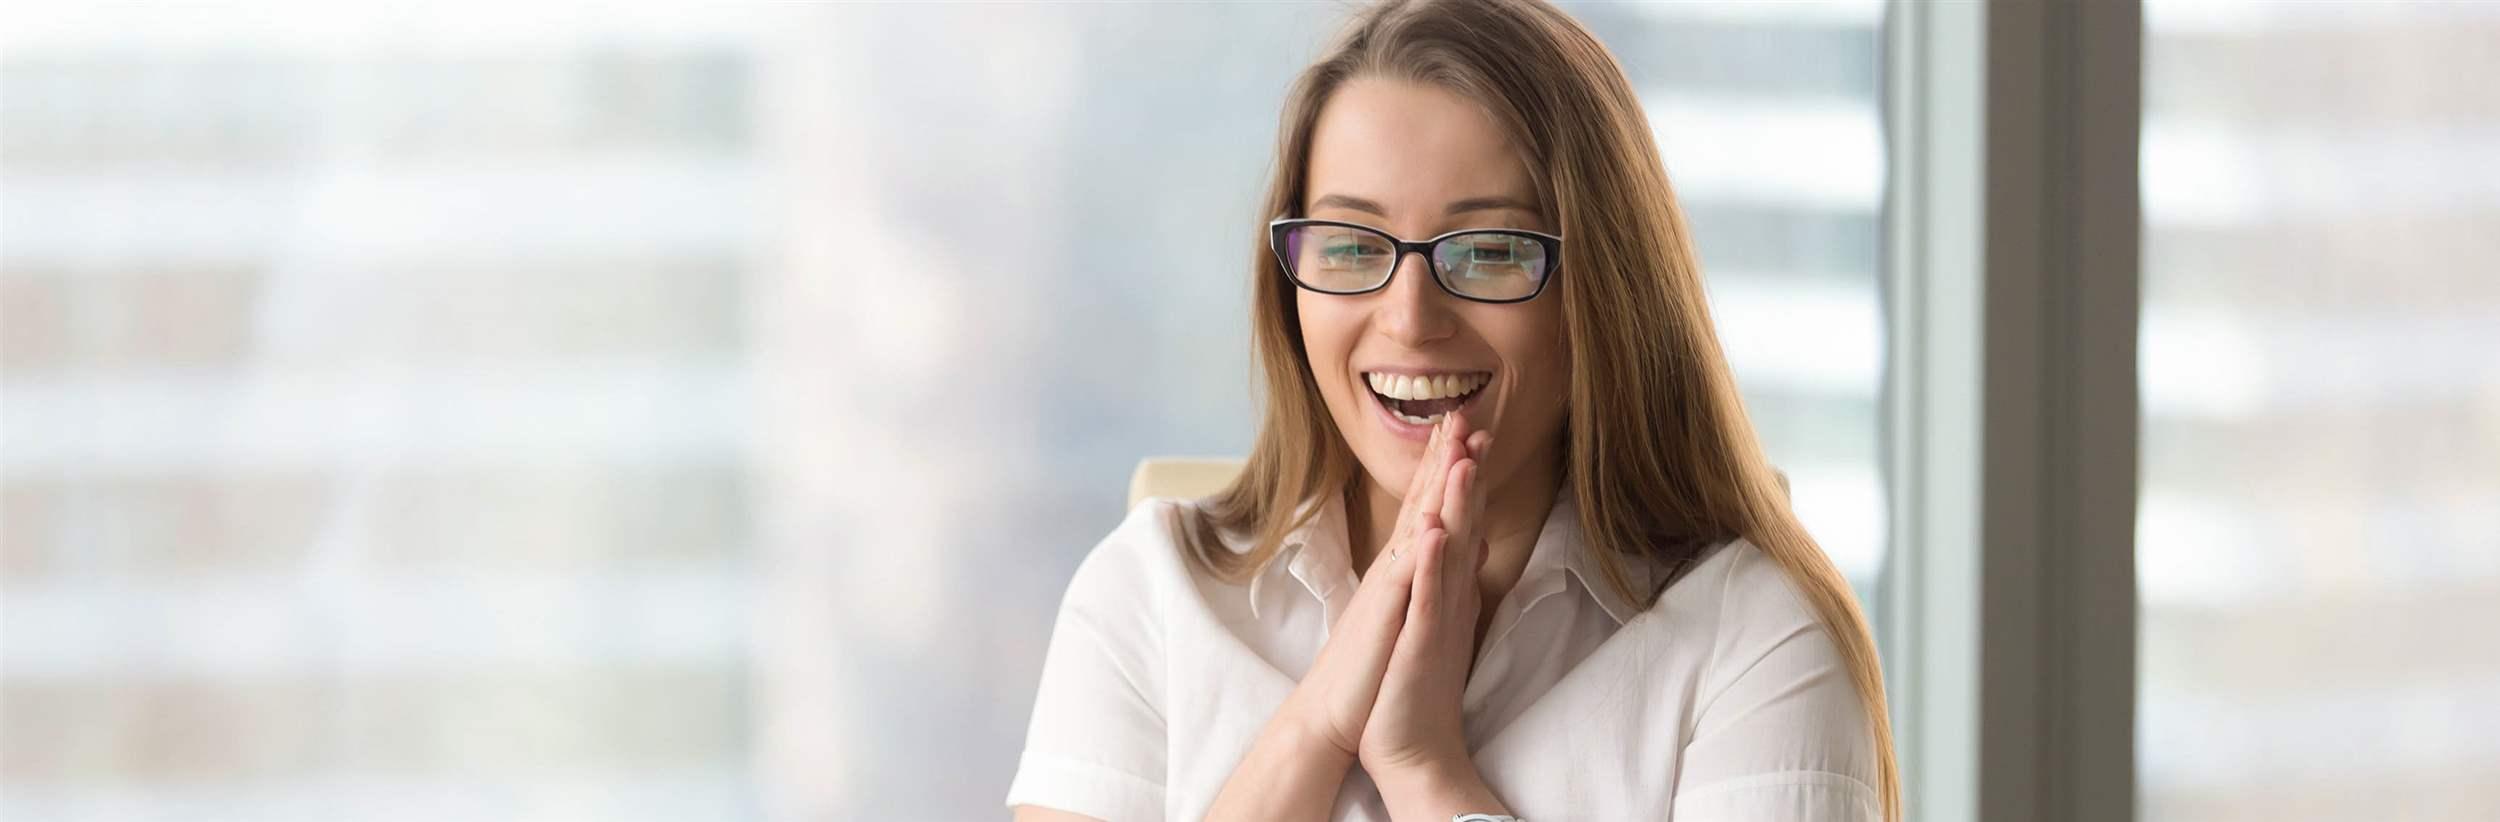 Happy businesswoman laughing with joy at workplace, gladly looking at laptop screen, feeling excited about online win, watching funny video on computer, enjoying positive good news in internet